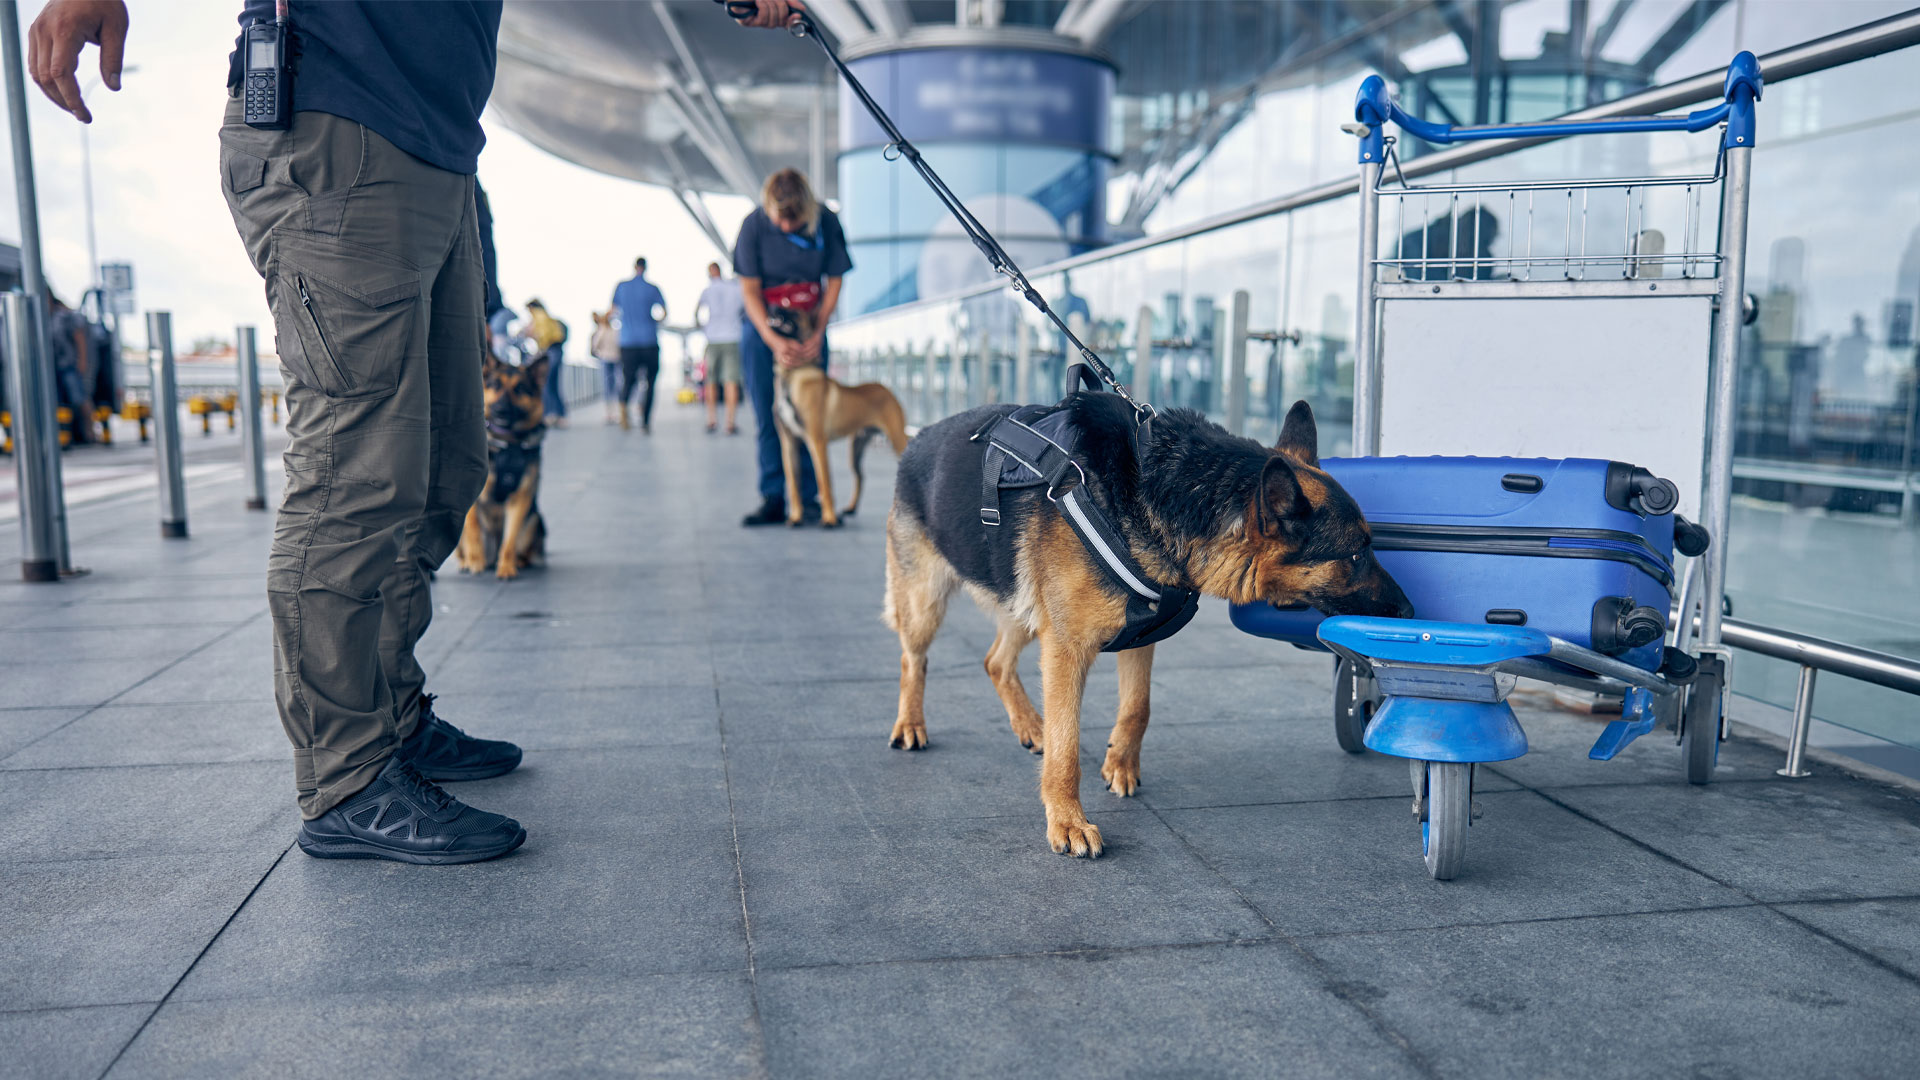 Airport sniffer dog inspecting a suitcase outside an airport in New Zealand.